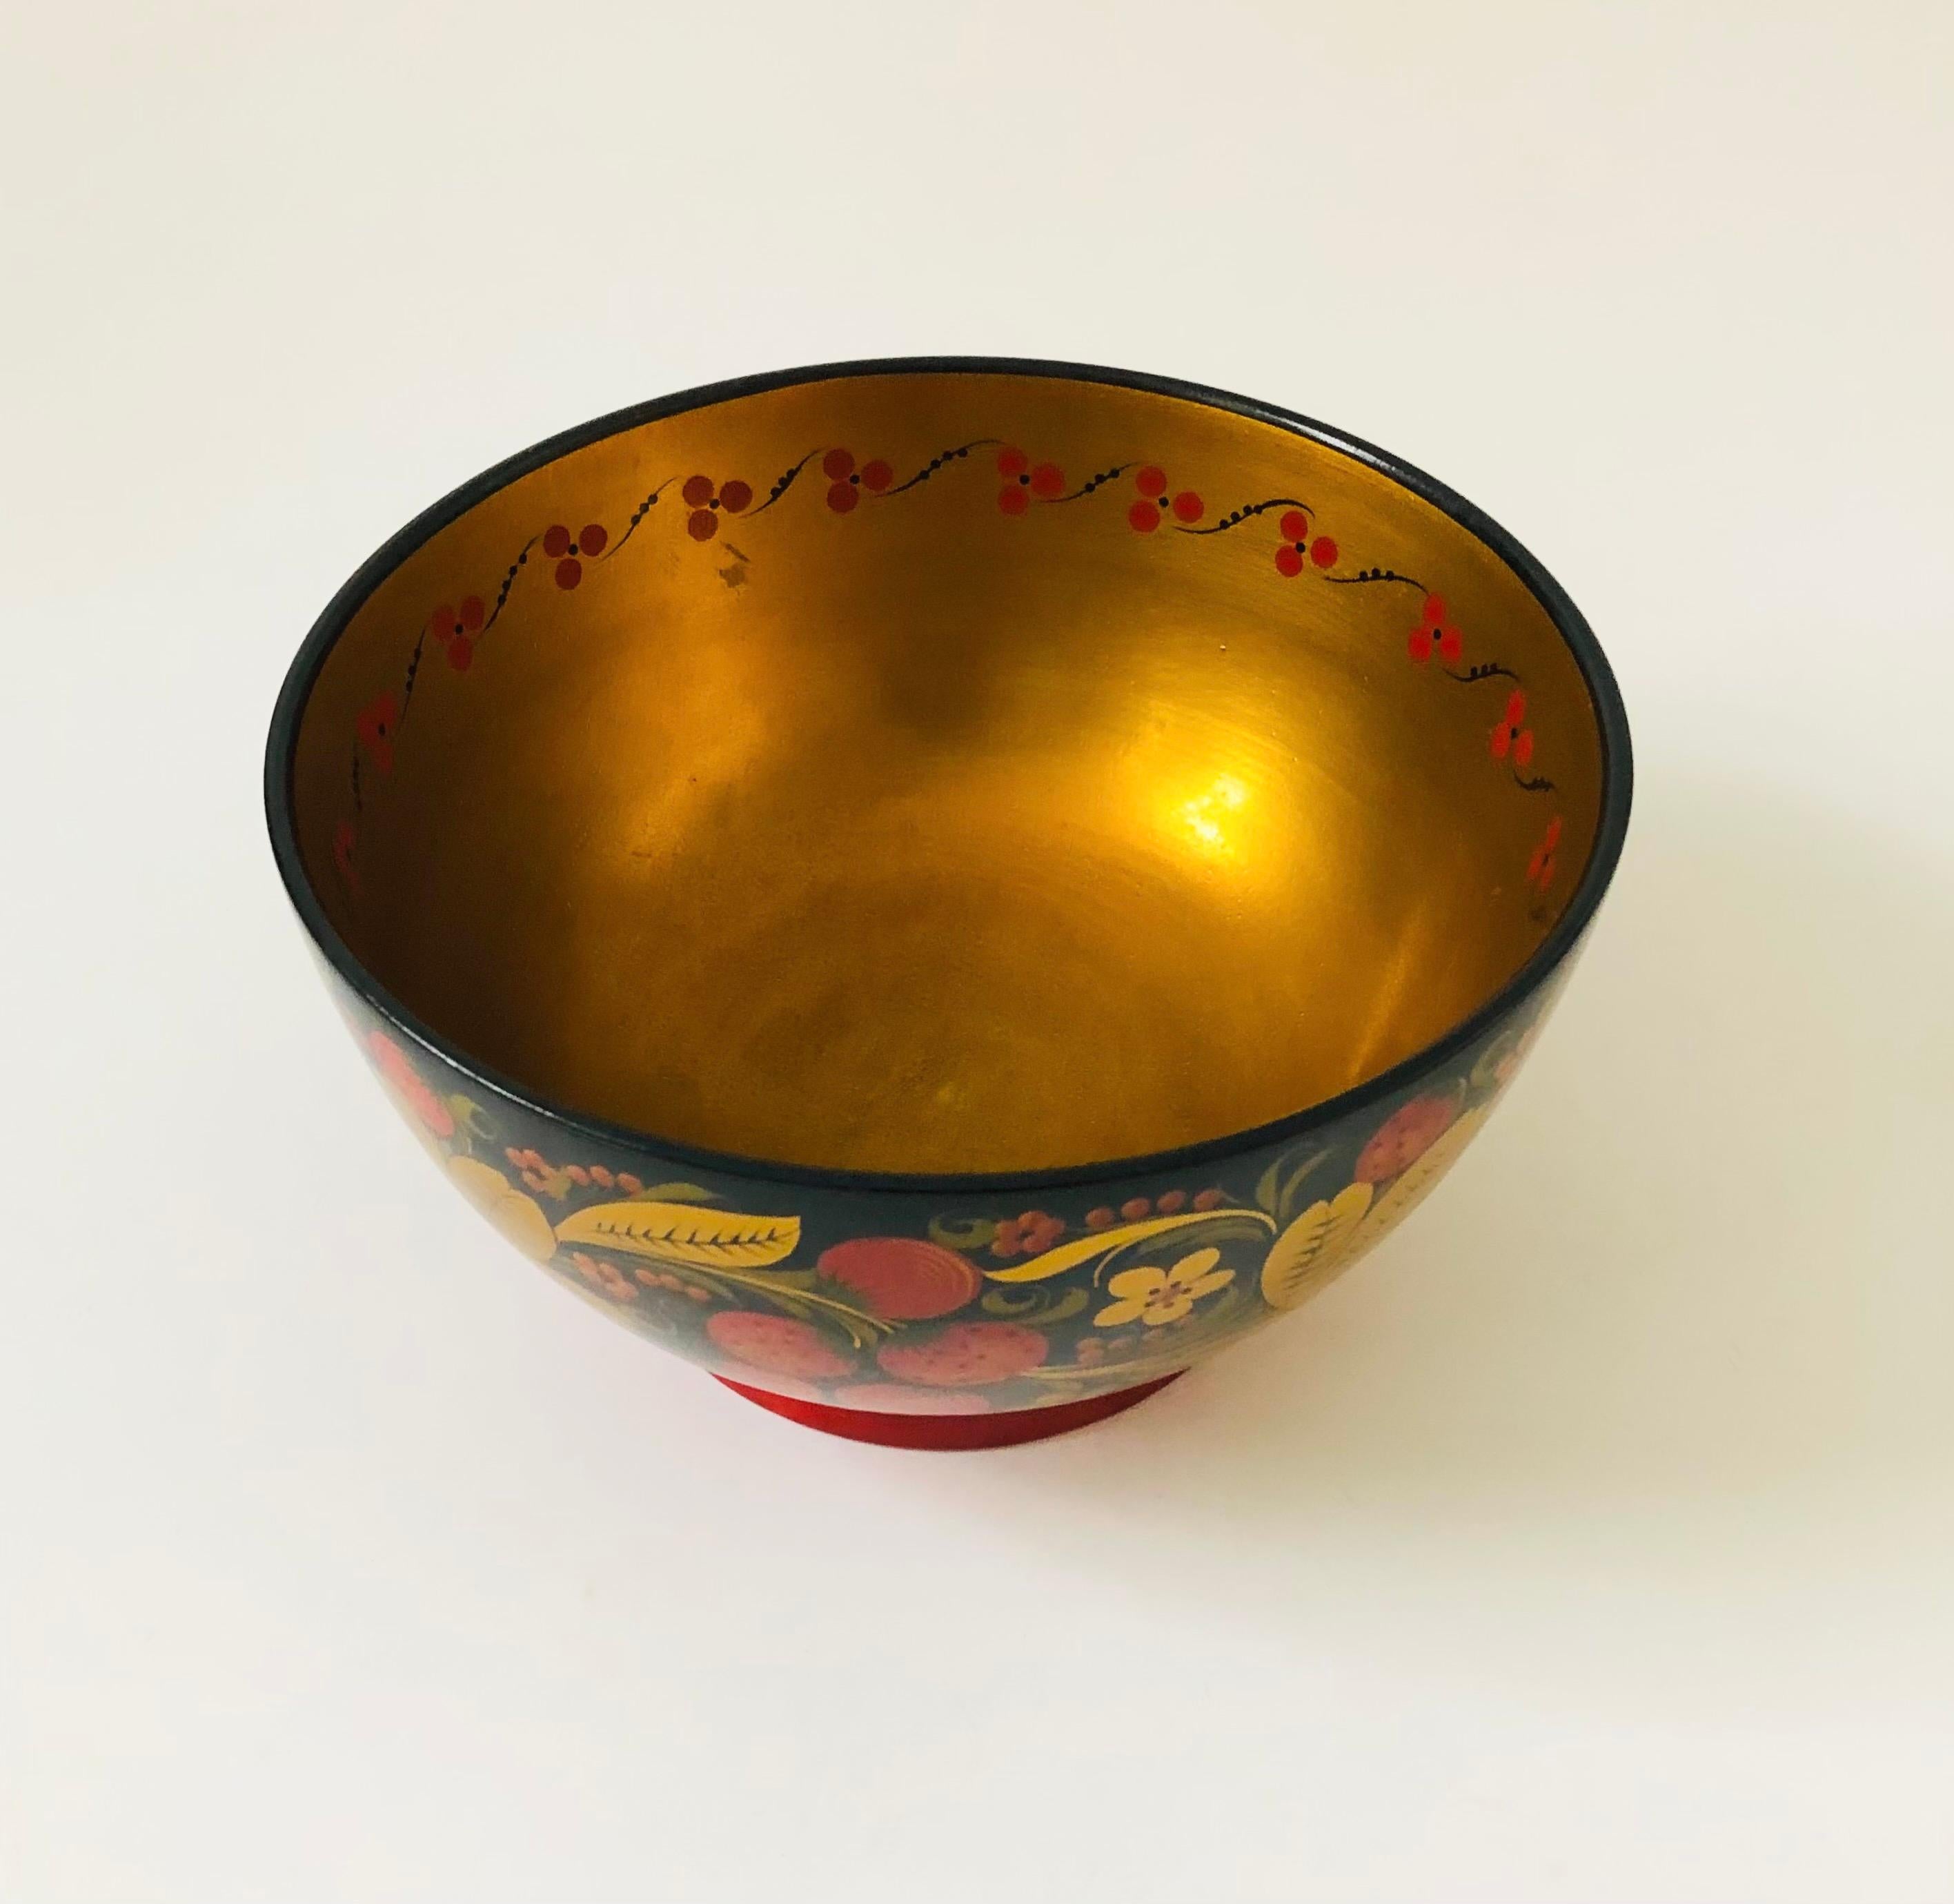 A beautiful vintage Russian Khokhloma lacquerware bowl. Made of wood with a colorful hand painted and lacquered floral design in gold, red, and black. Original sticker is still attached and printed 